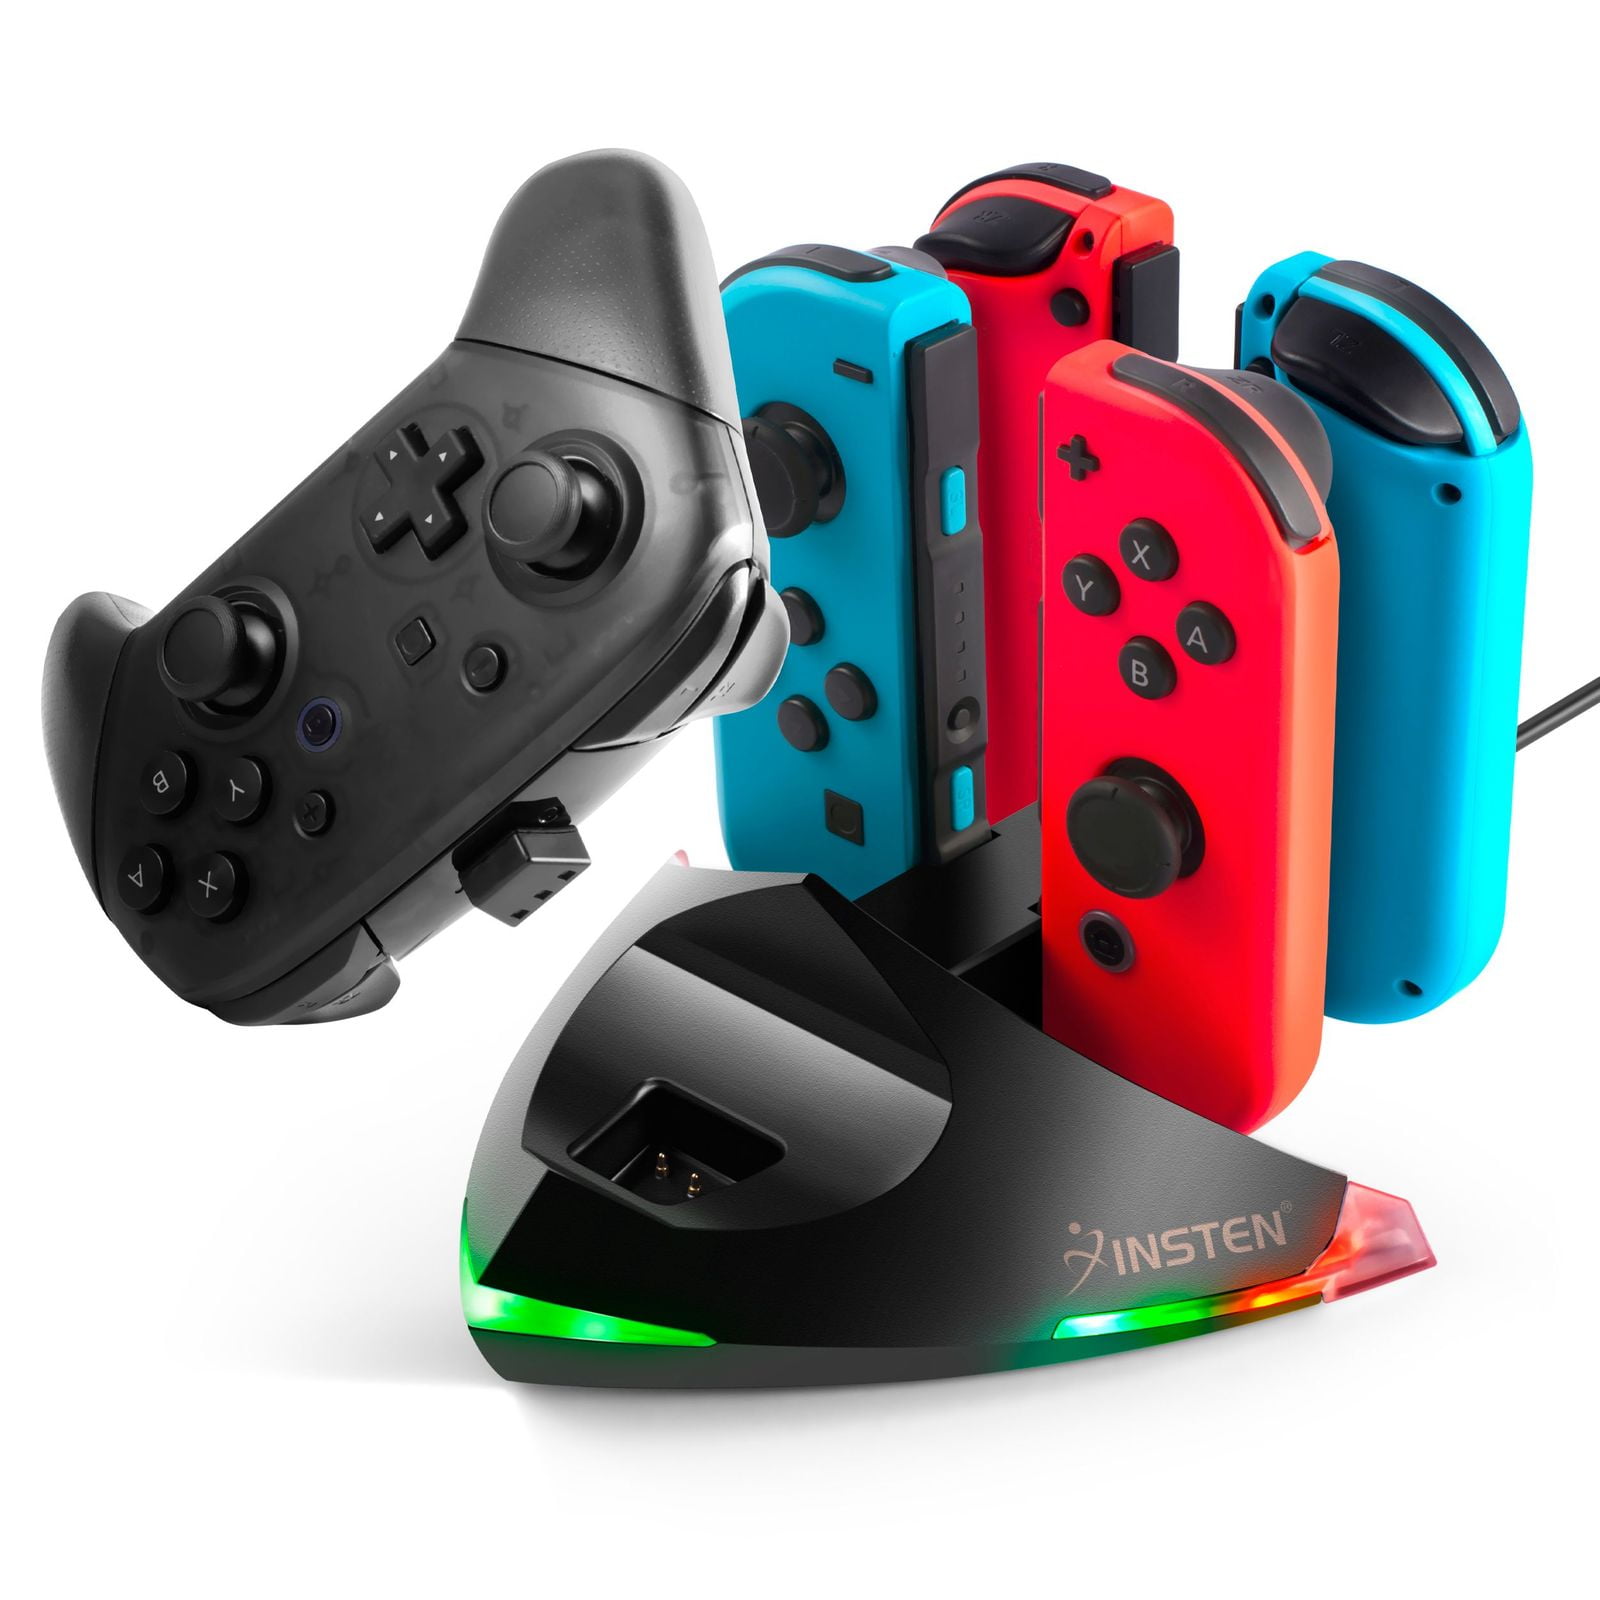 Hændelse Indbildsk Europa For Nintendo Switch and OLED Model 2021 Joycon and Pro Controllers Charger,  5 in 1 Joy Con Charging Dock with Light and USB Type C Charging Cable -  Walmart.com